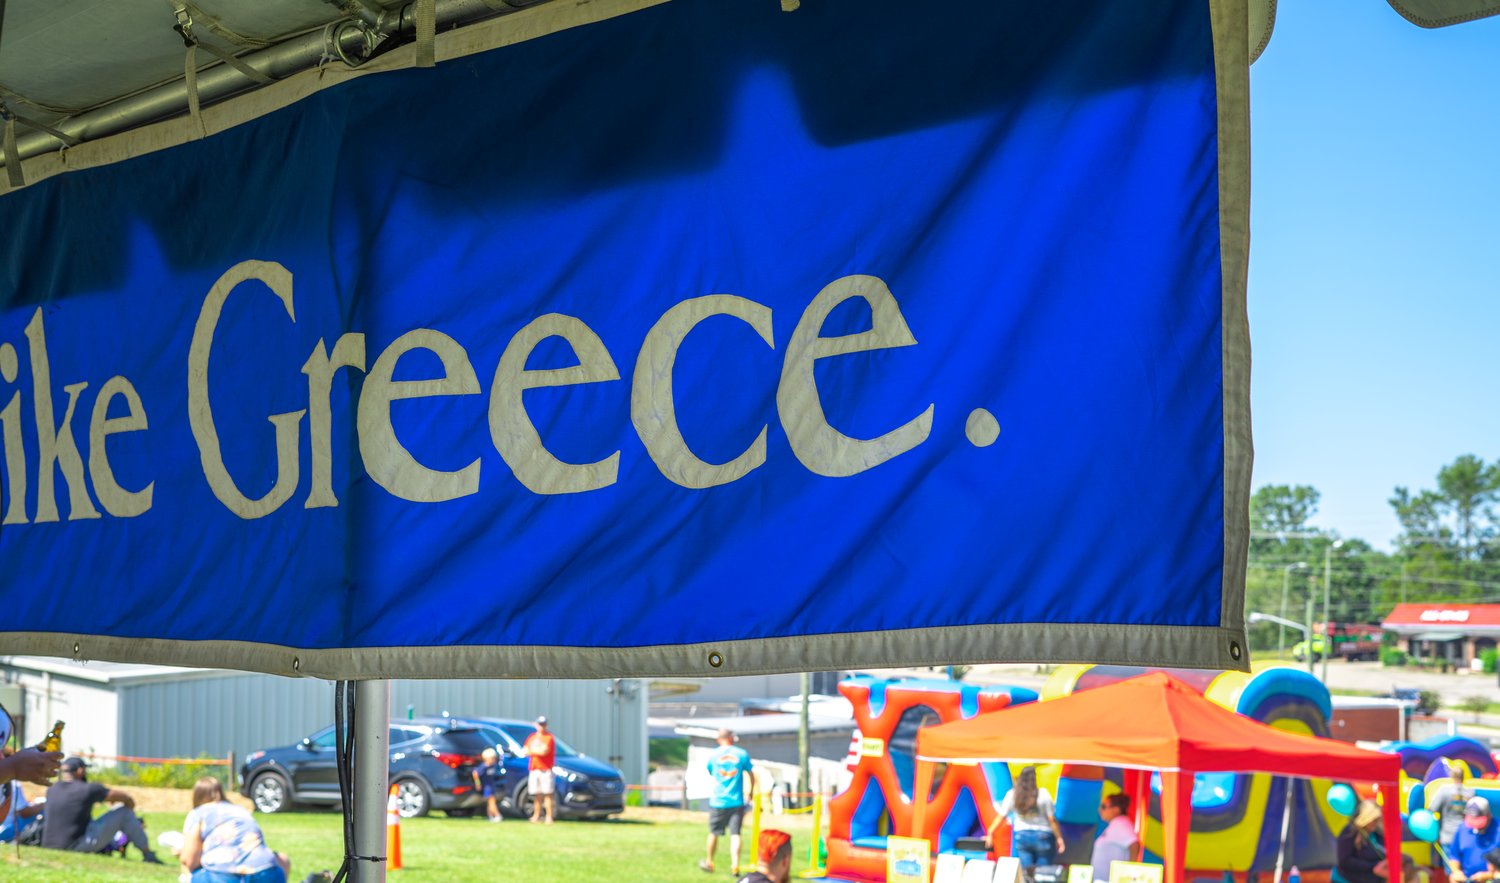 The 2022 Greek Festival, hosted by Saints Constantine and Helen Greek Orthodox Church, was held on Sept. 17-18.